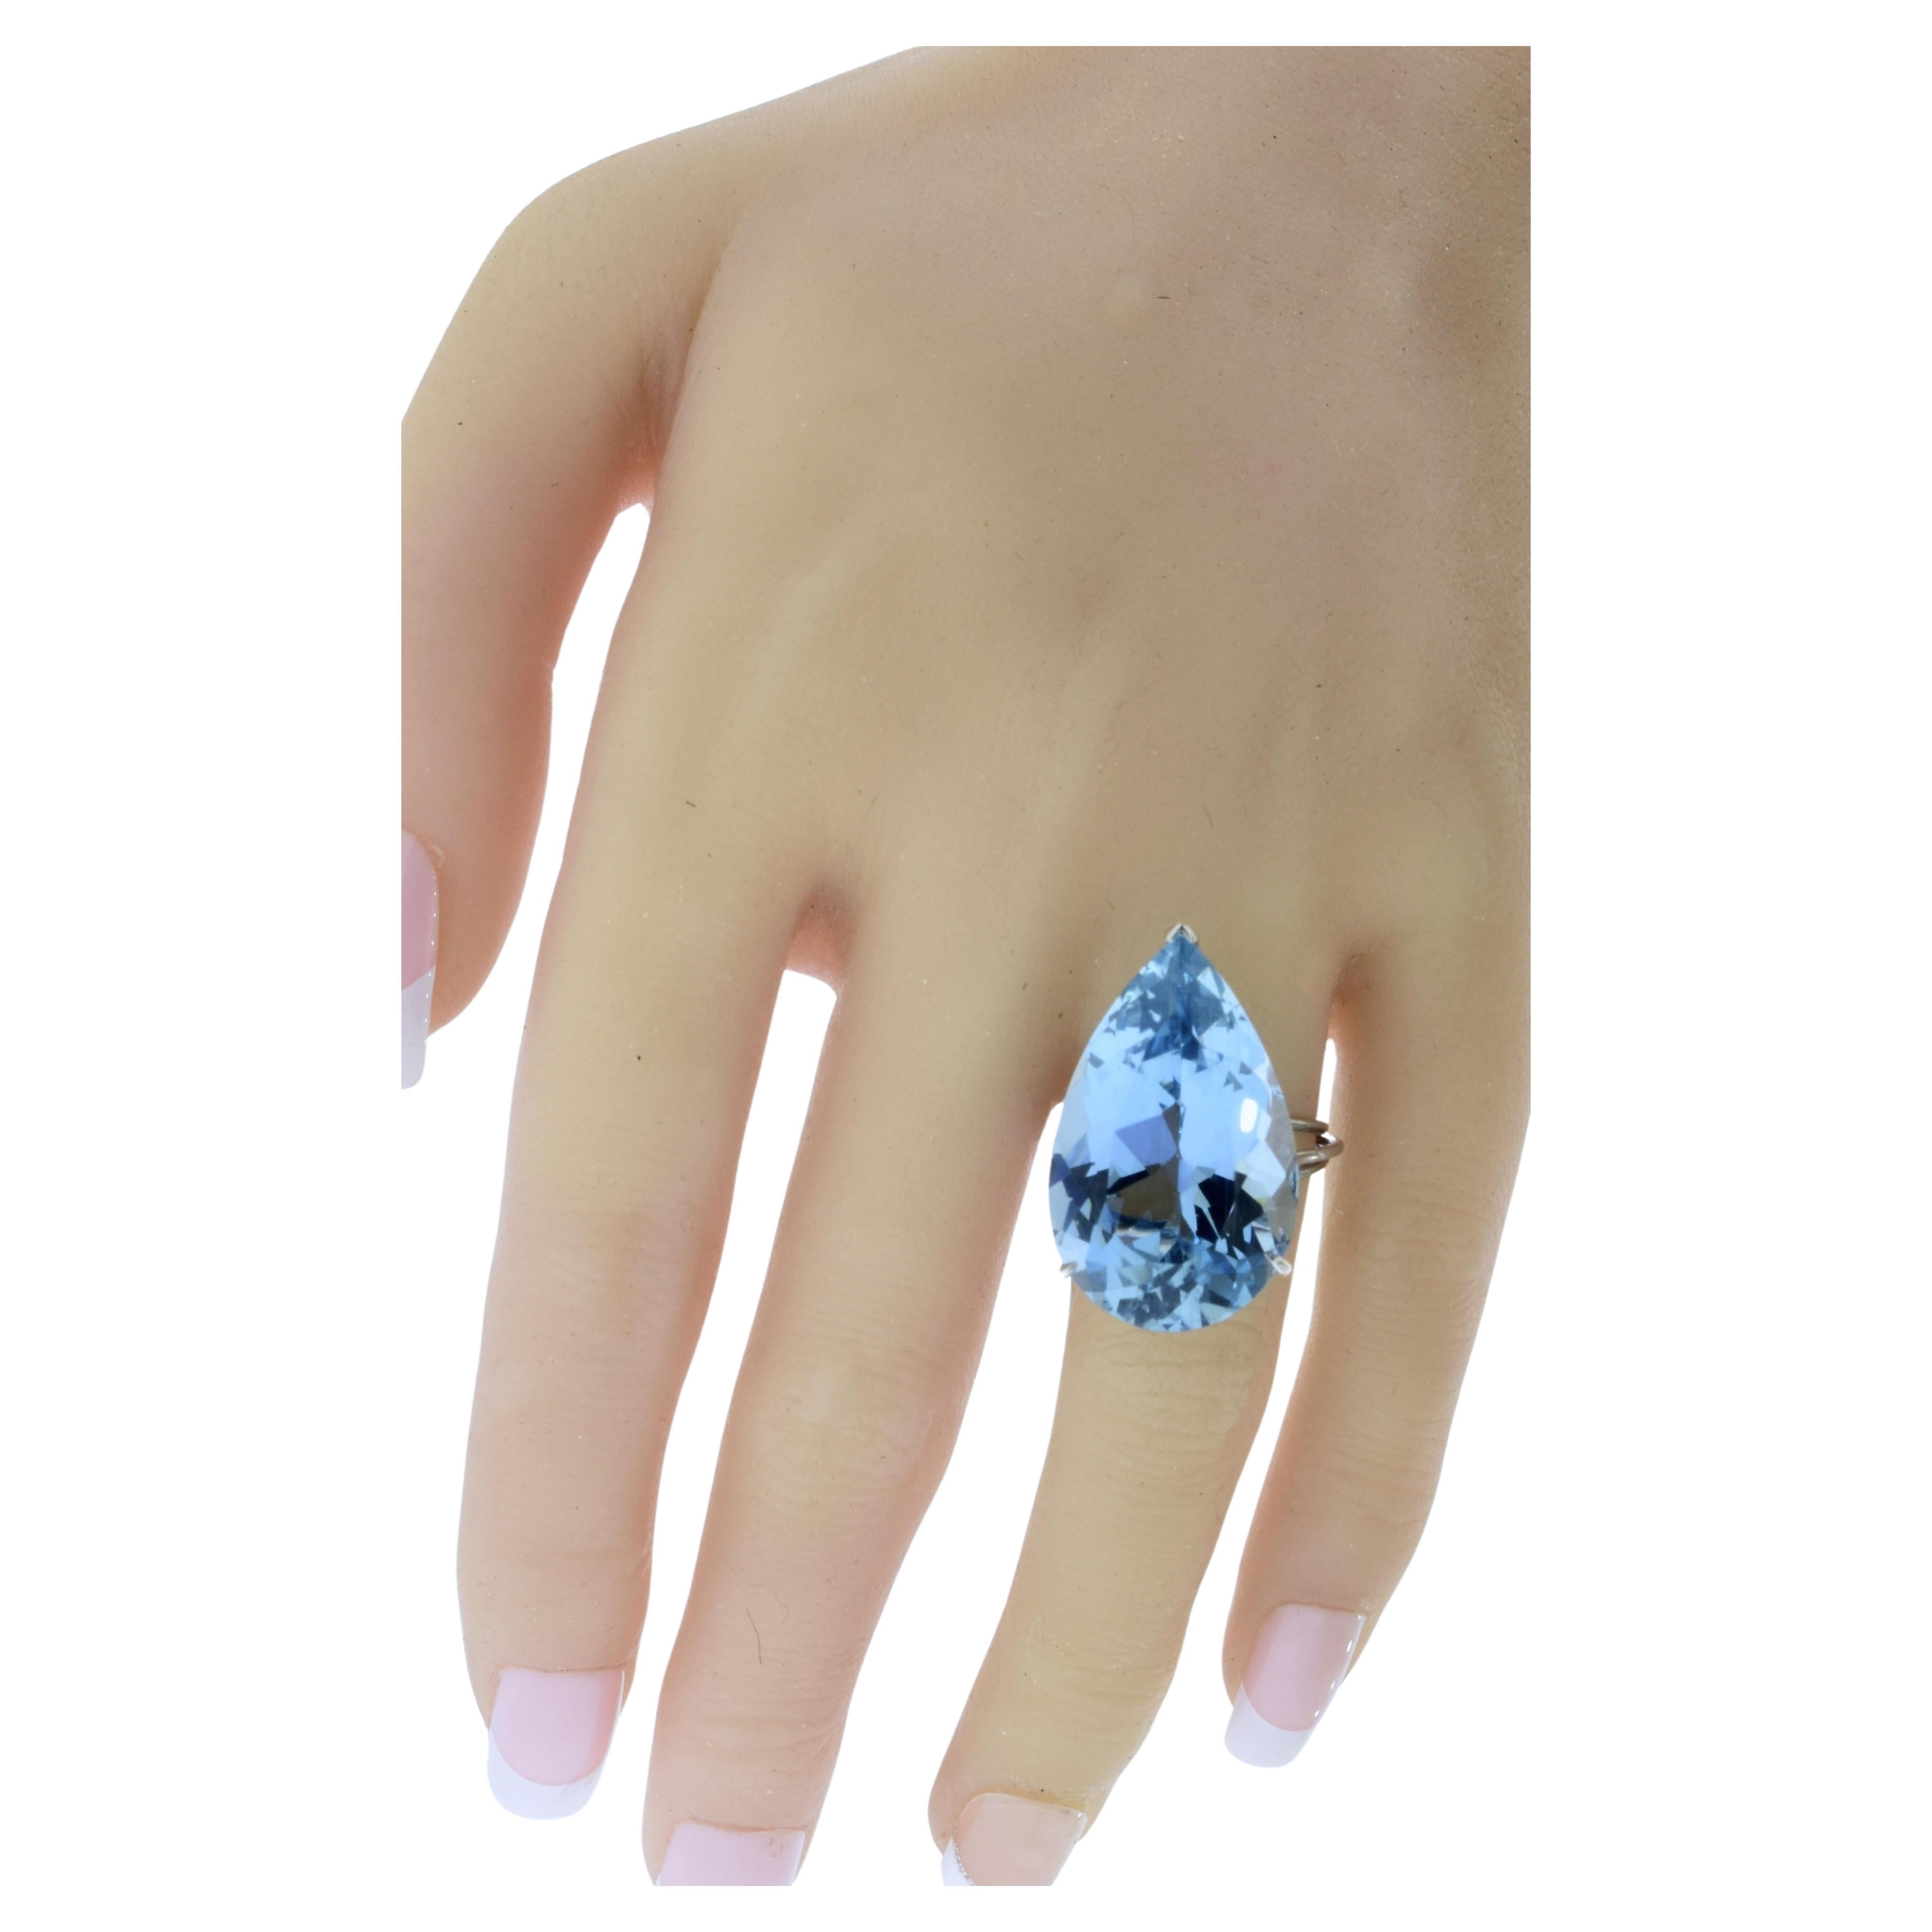 The fine large natural Aquamarine is probably from the Brazilian Santa Maria mines as evident of the stone's fine color, (without green undertones) and clarity. The bright stone is prong set in a fine hand-crafted platinum setting.  
,
This ring is